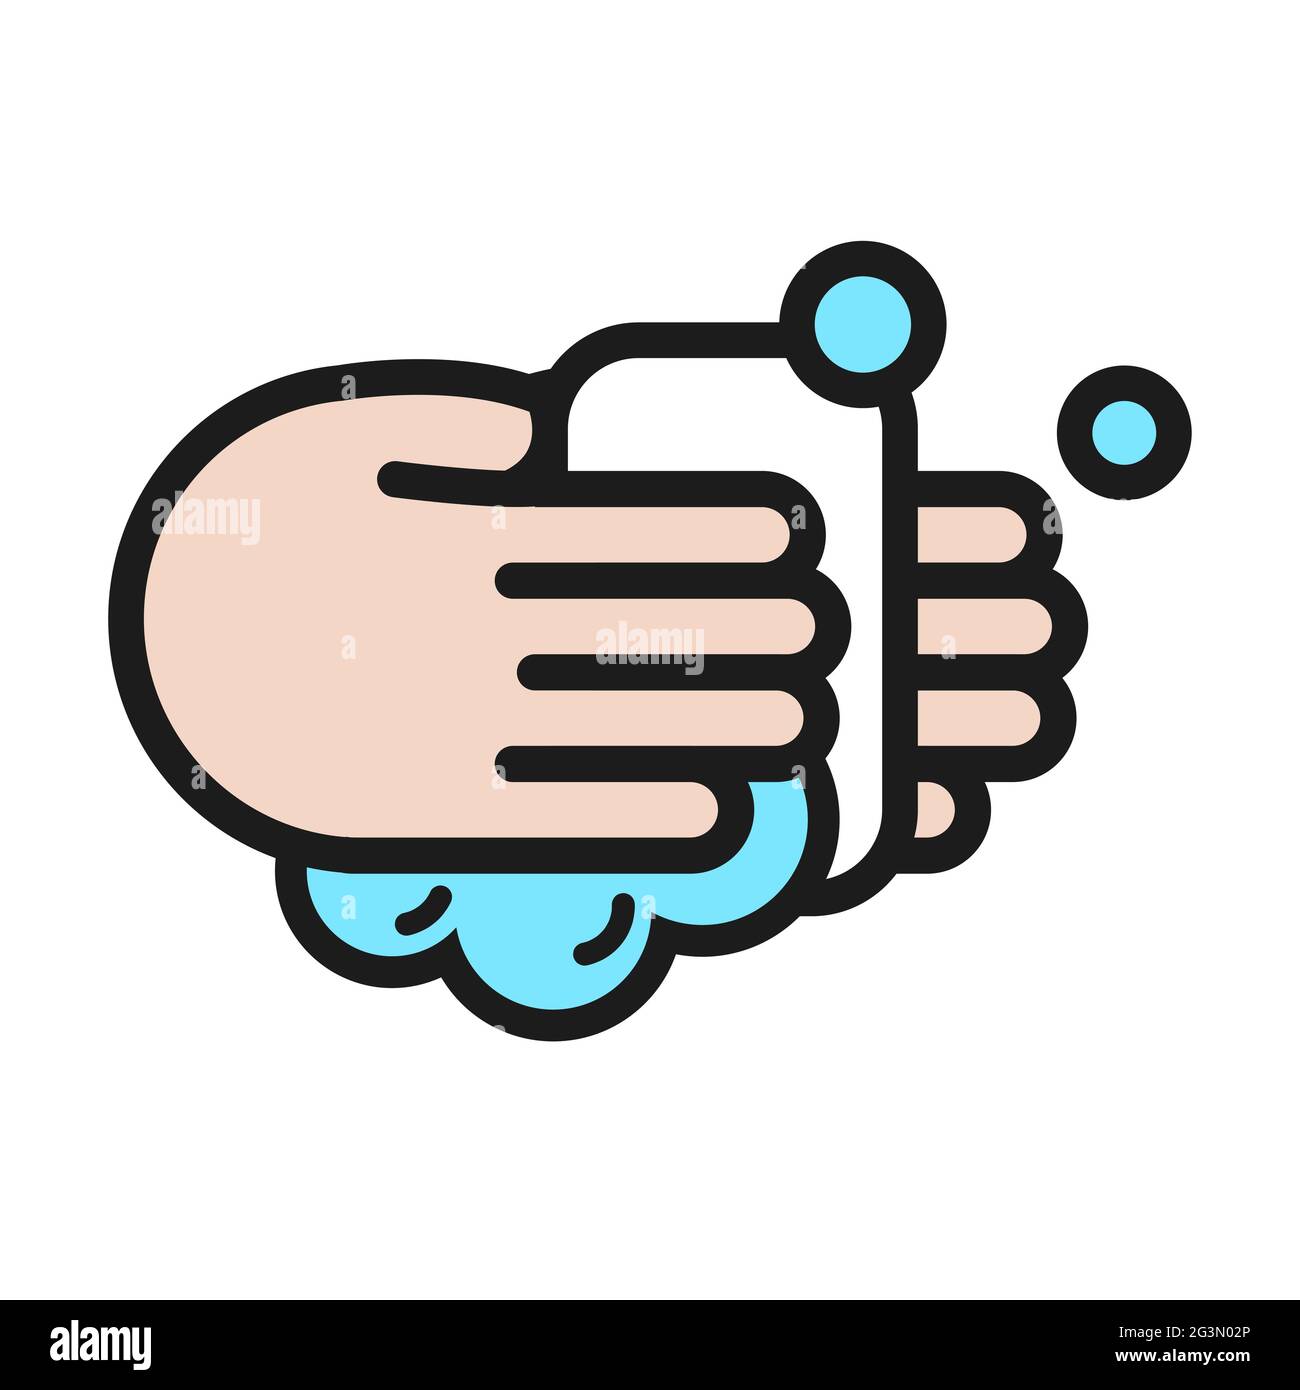 Wash your hands using soap, to avoid the bacteria, germs, and viruses that are currently Coronavirus Covid-19. Vector illustration of icon Stock Vector